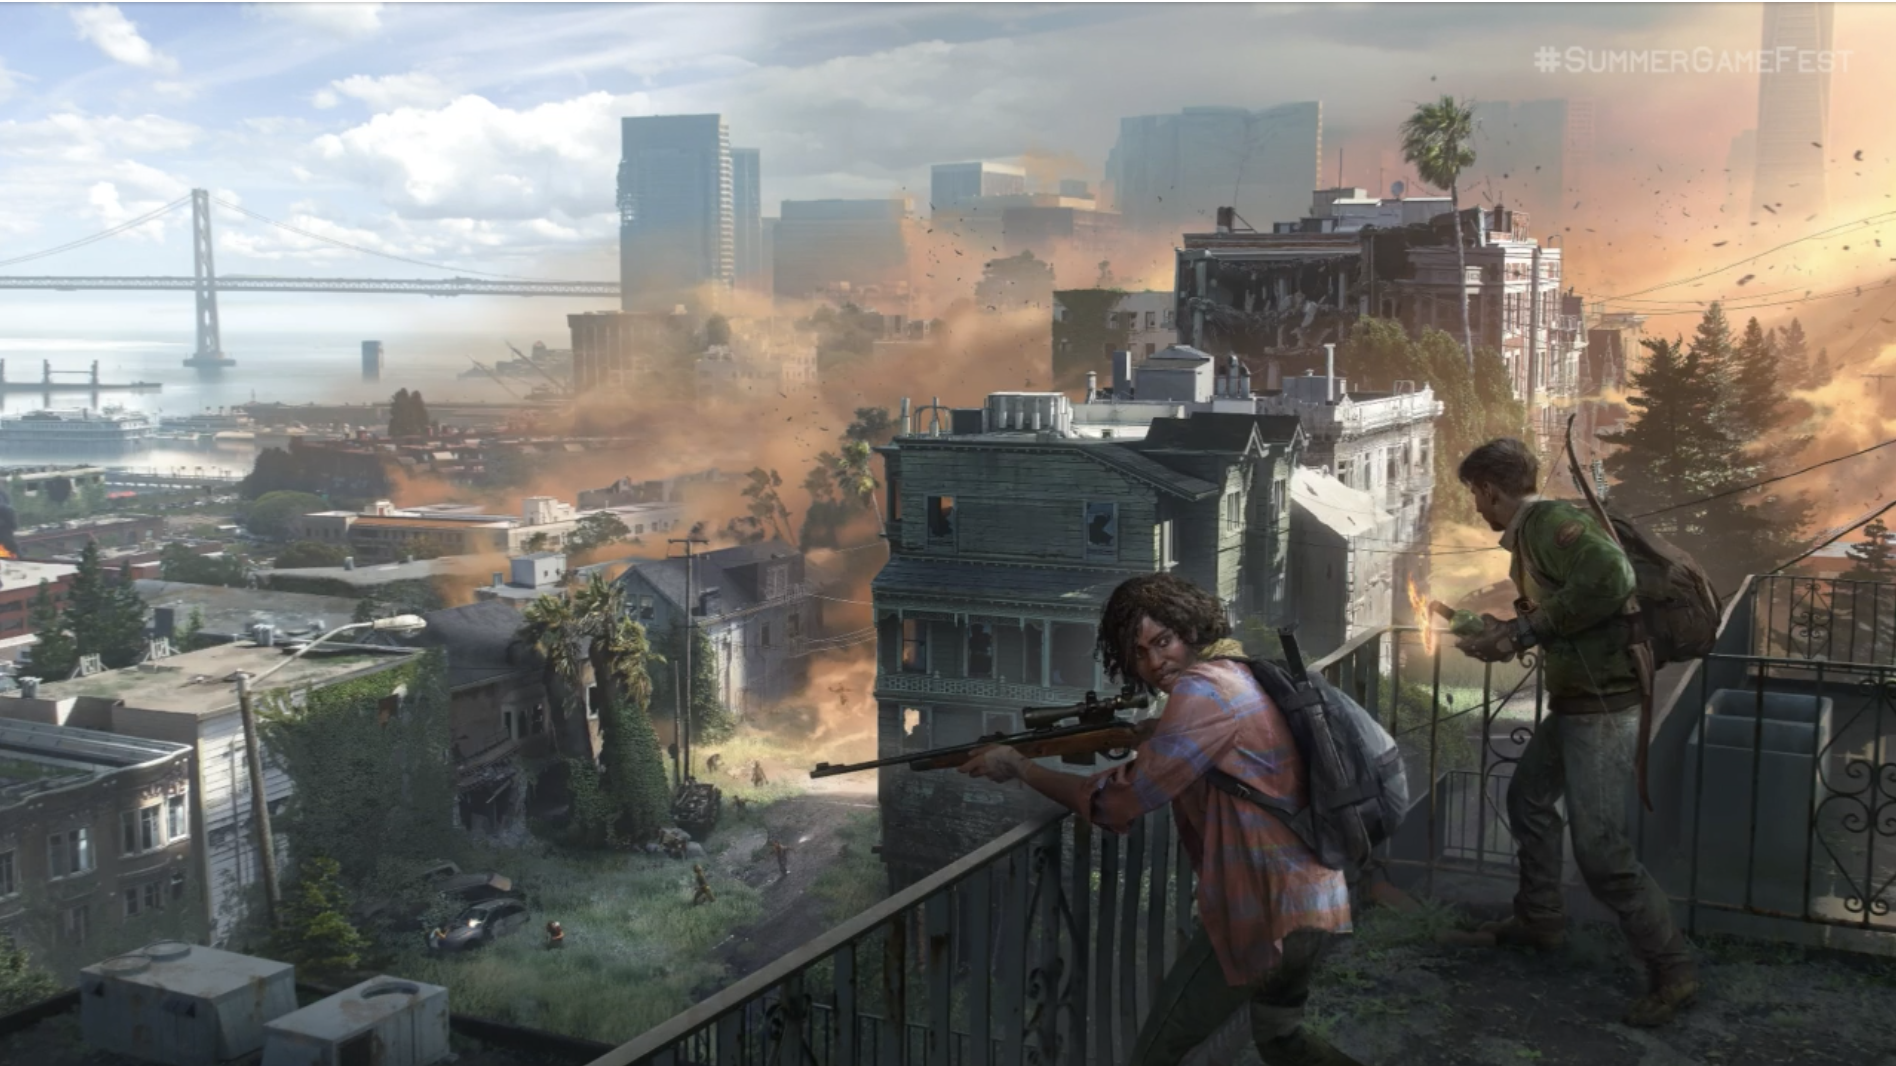 The Last Of Us Standalone Multiplayer Game Confirmed